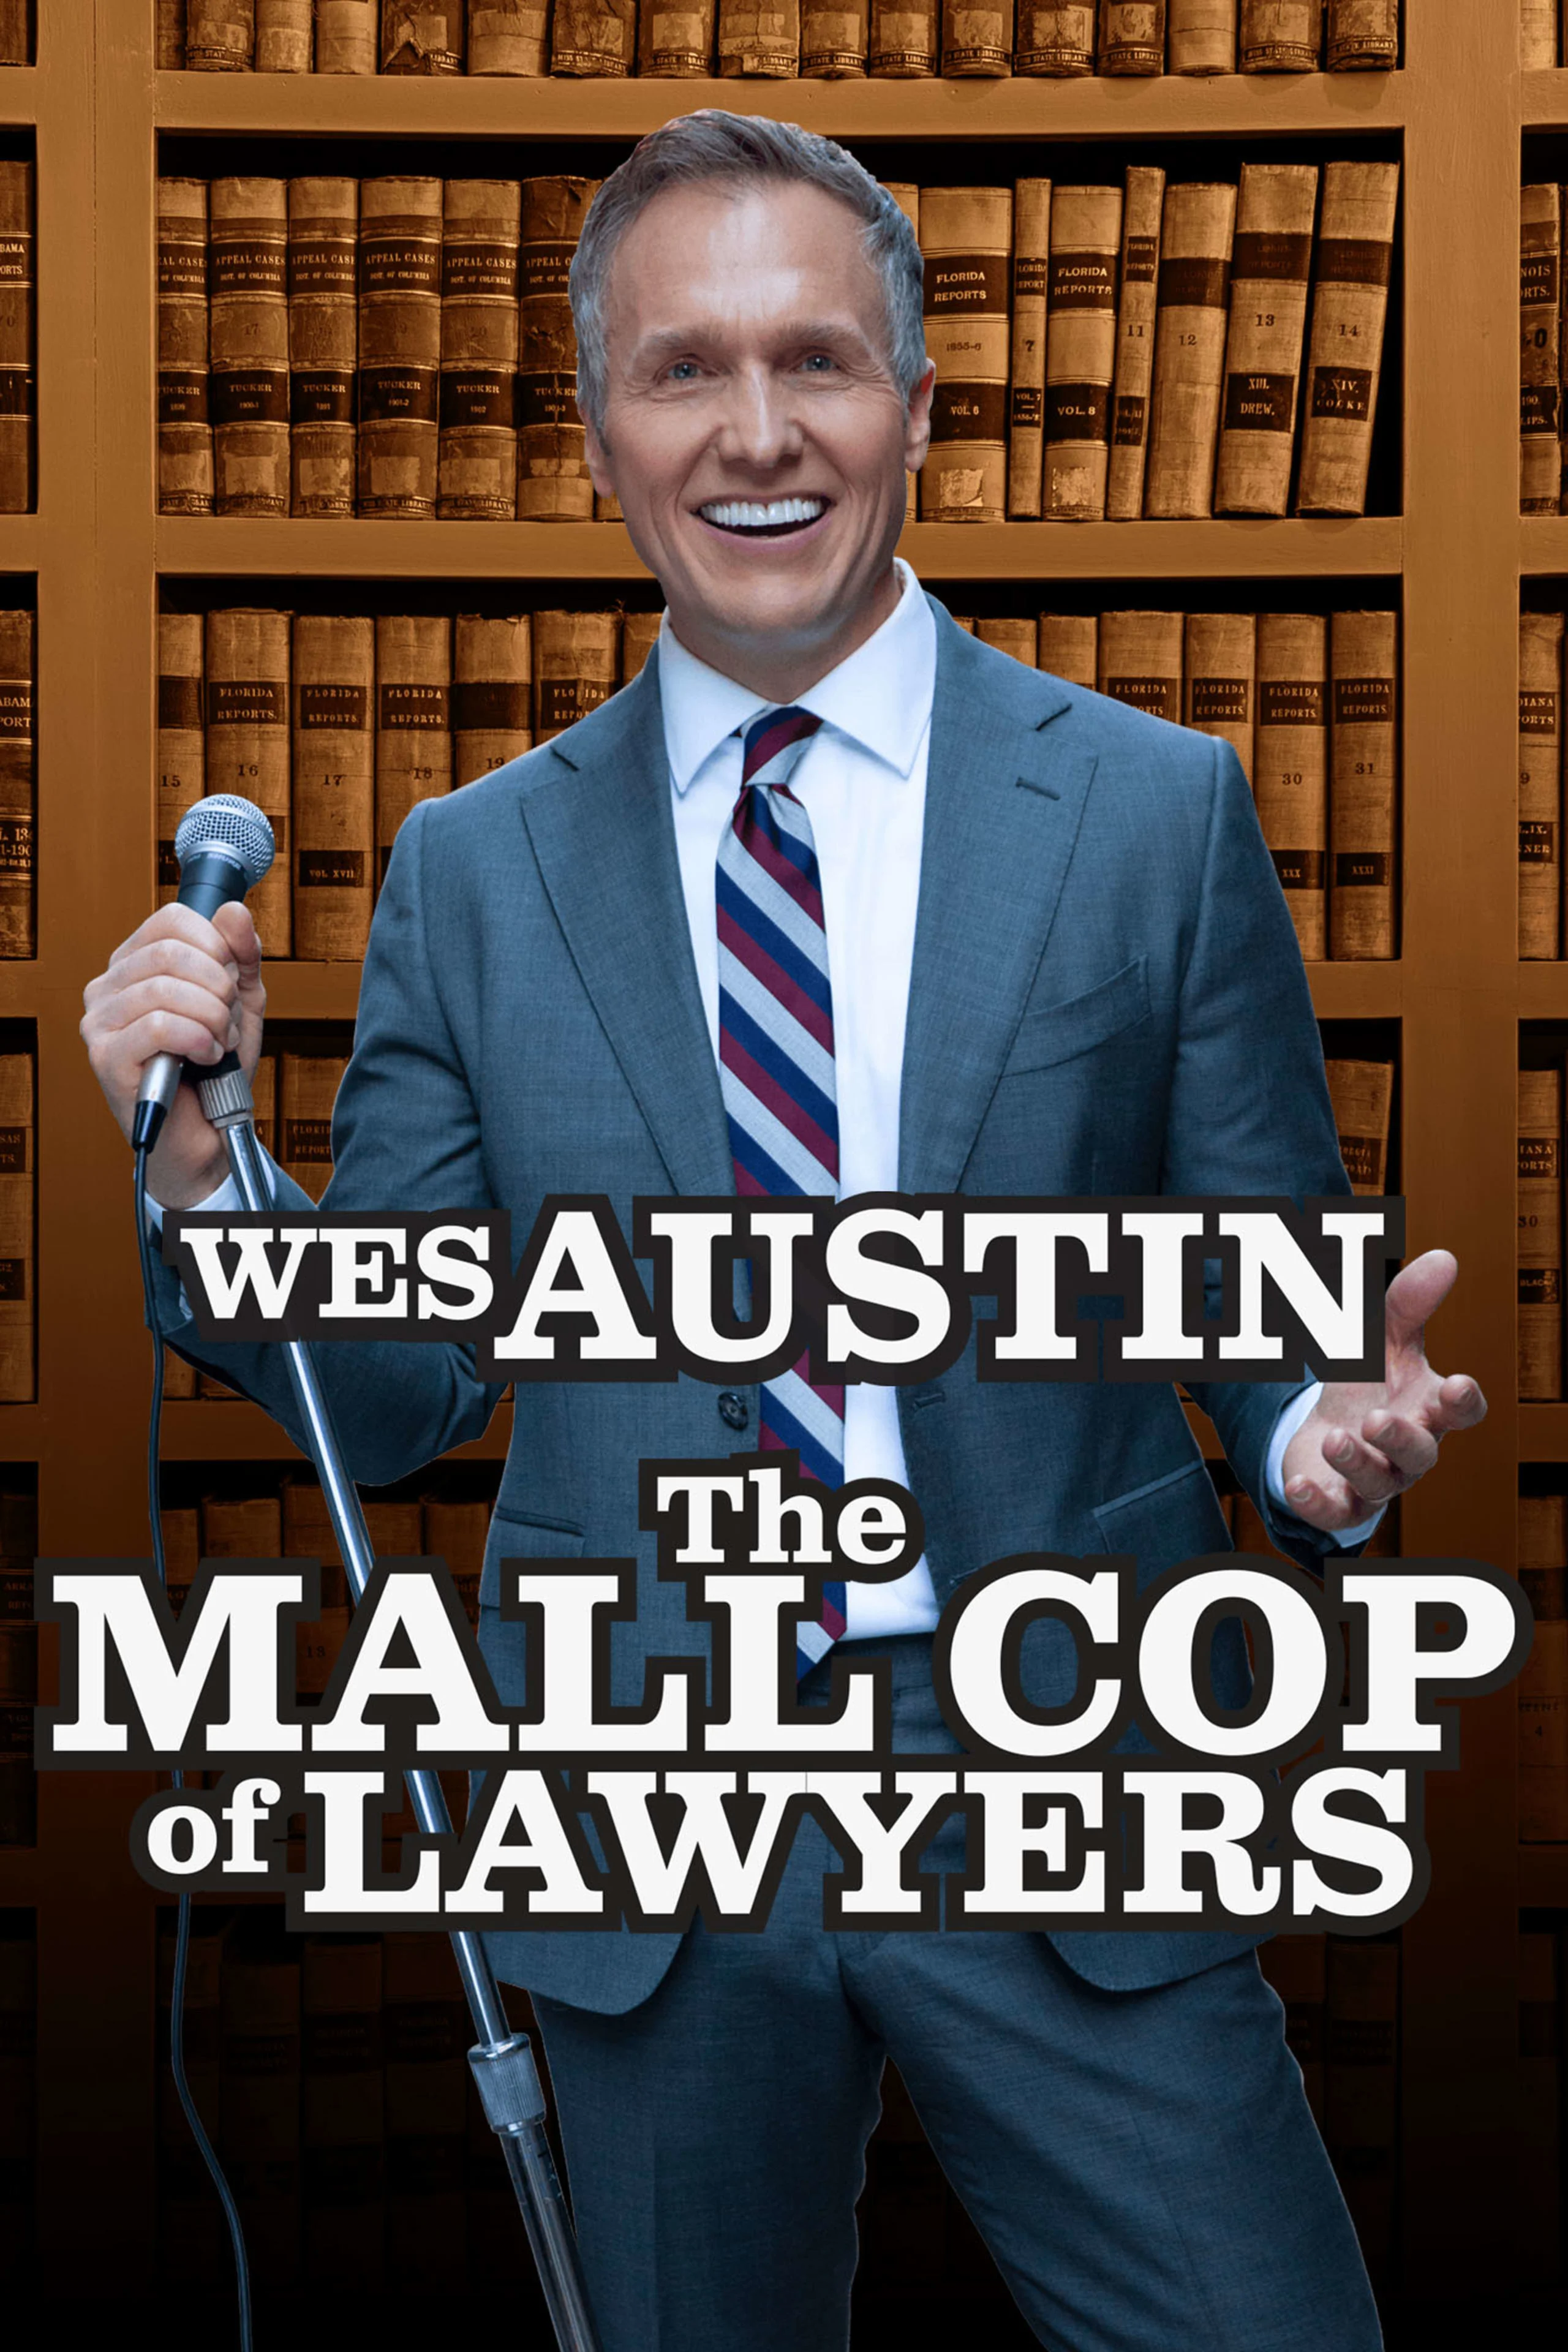 Wes Austin - The Mall Cop of Lawyers